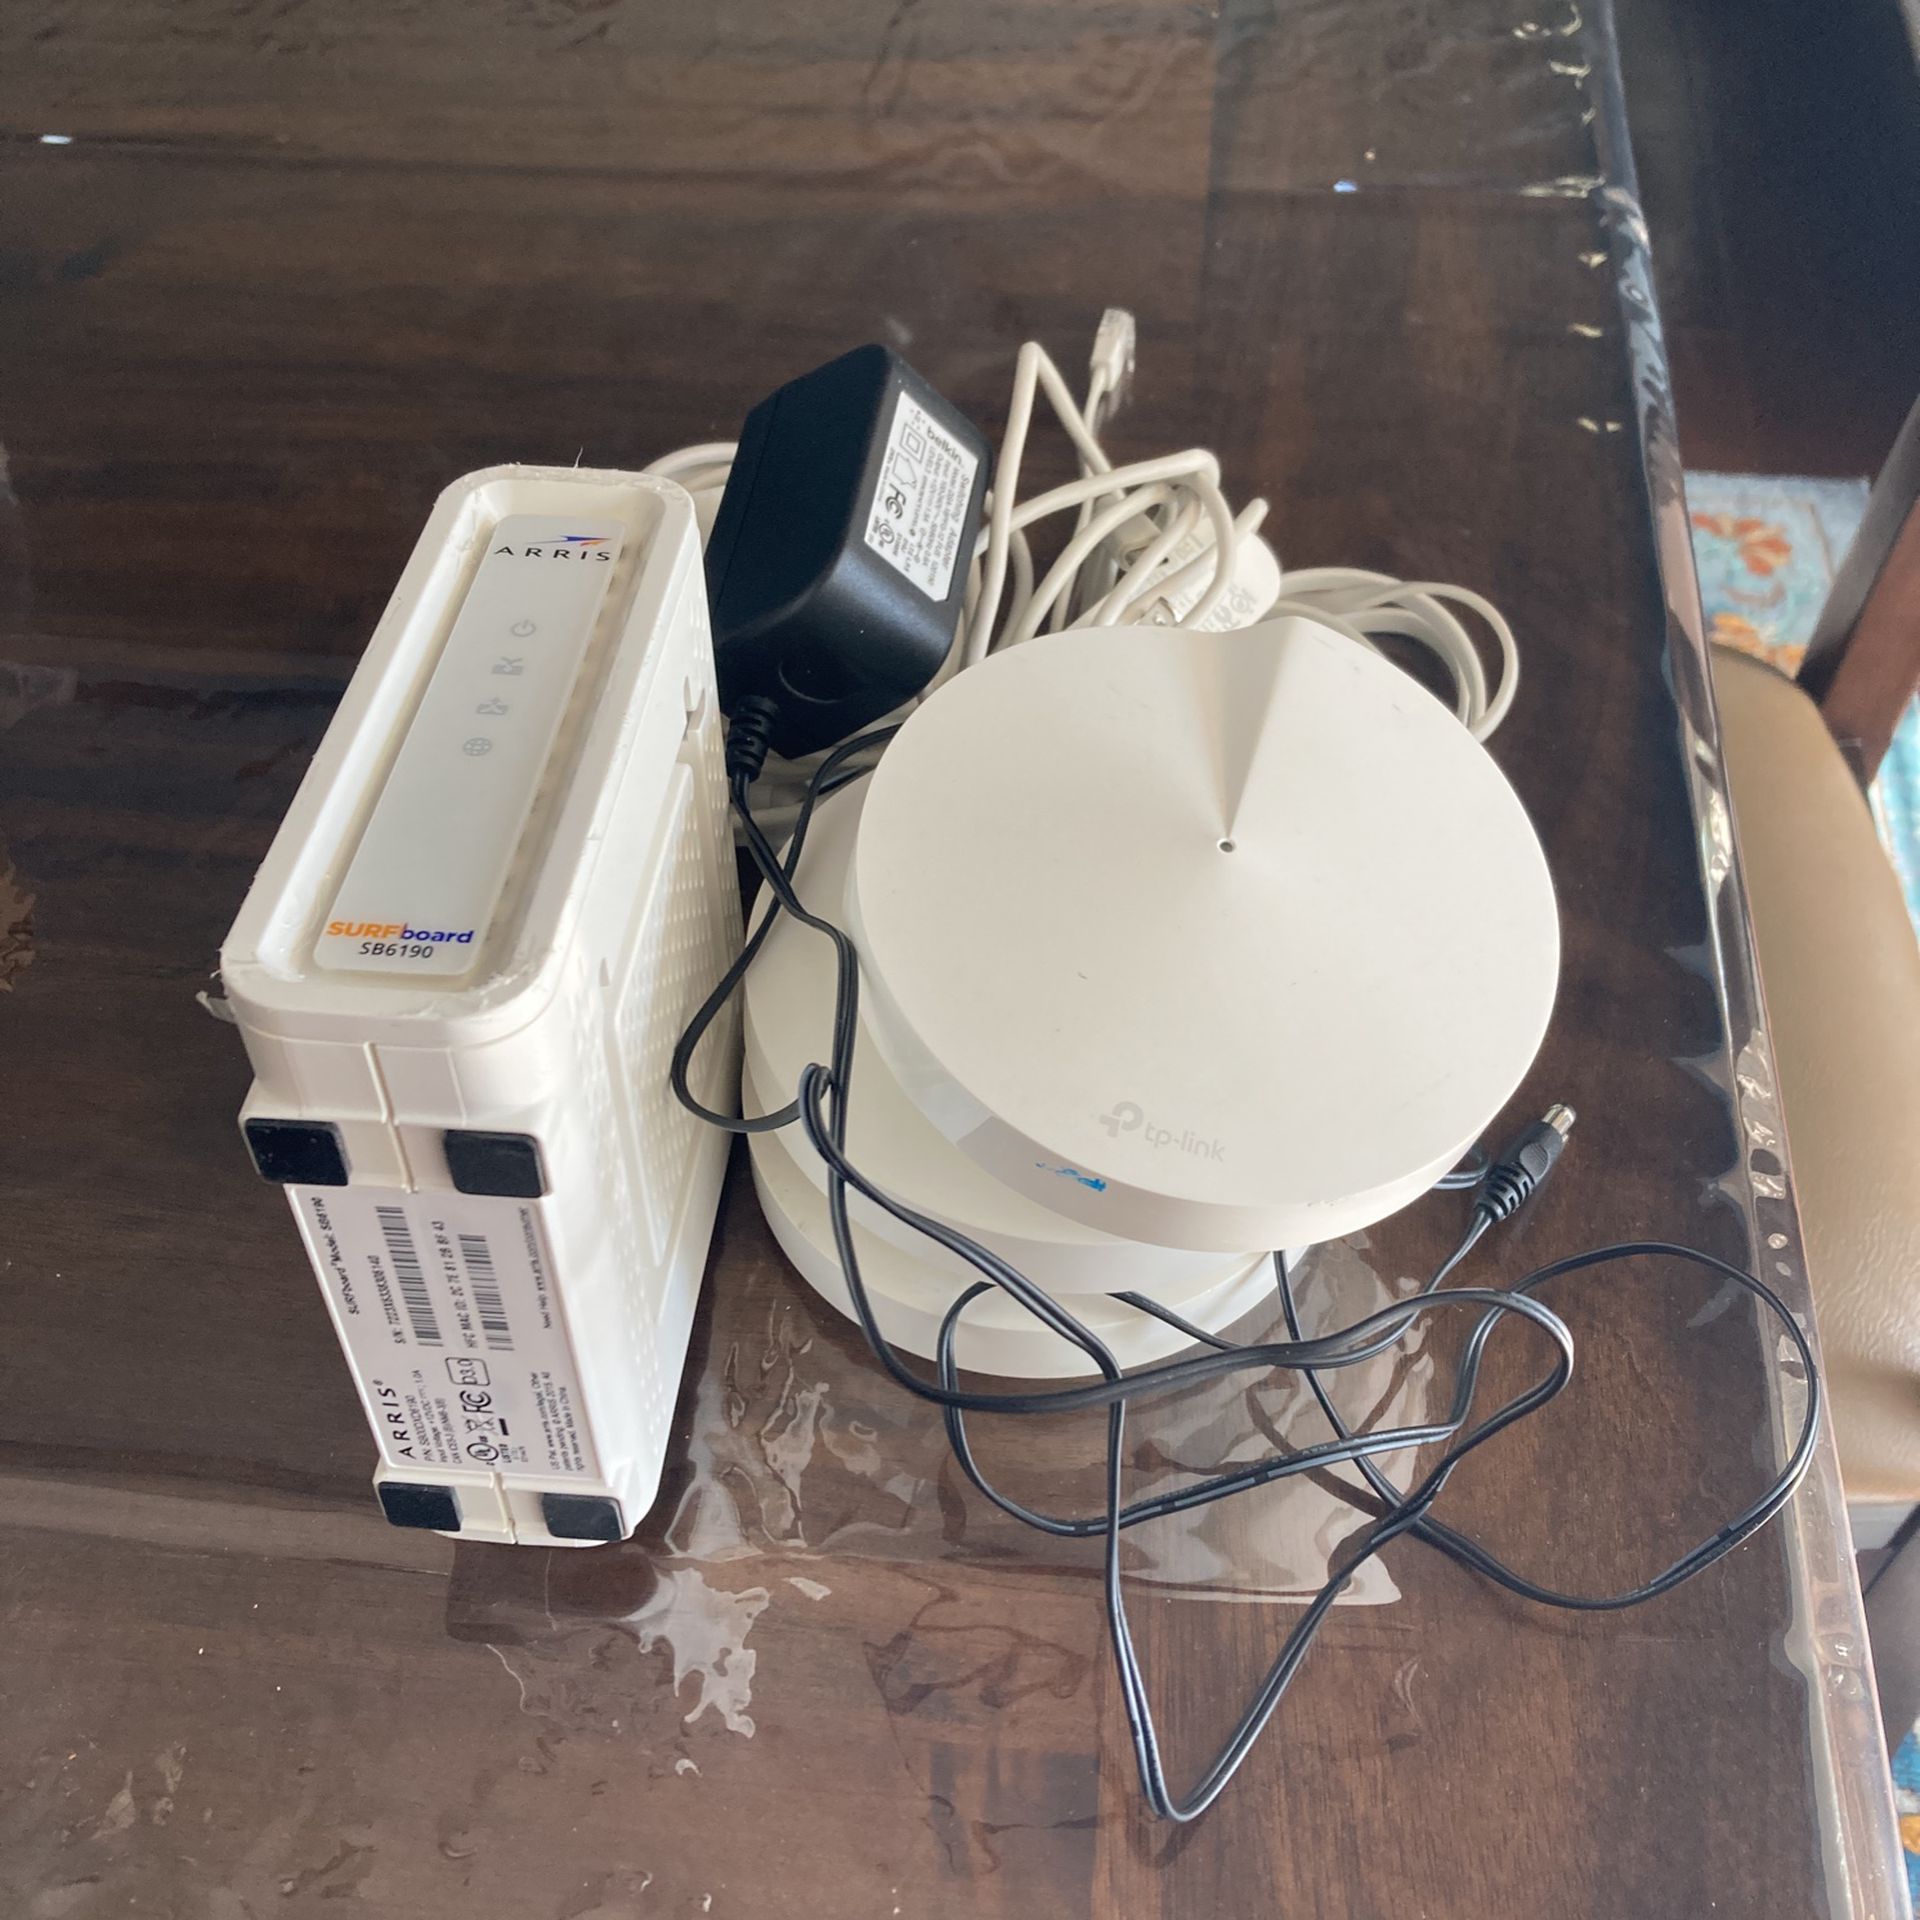 Cable modem And Wireless Mesh Router 